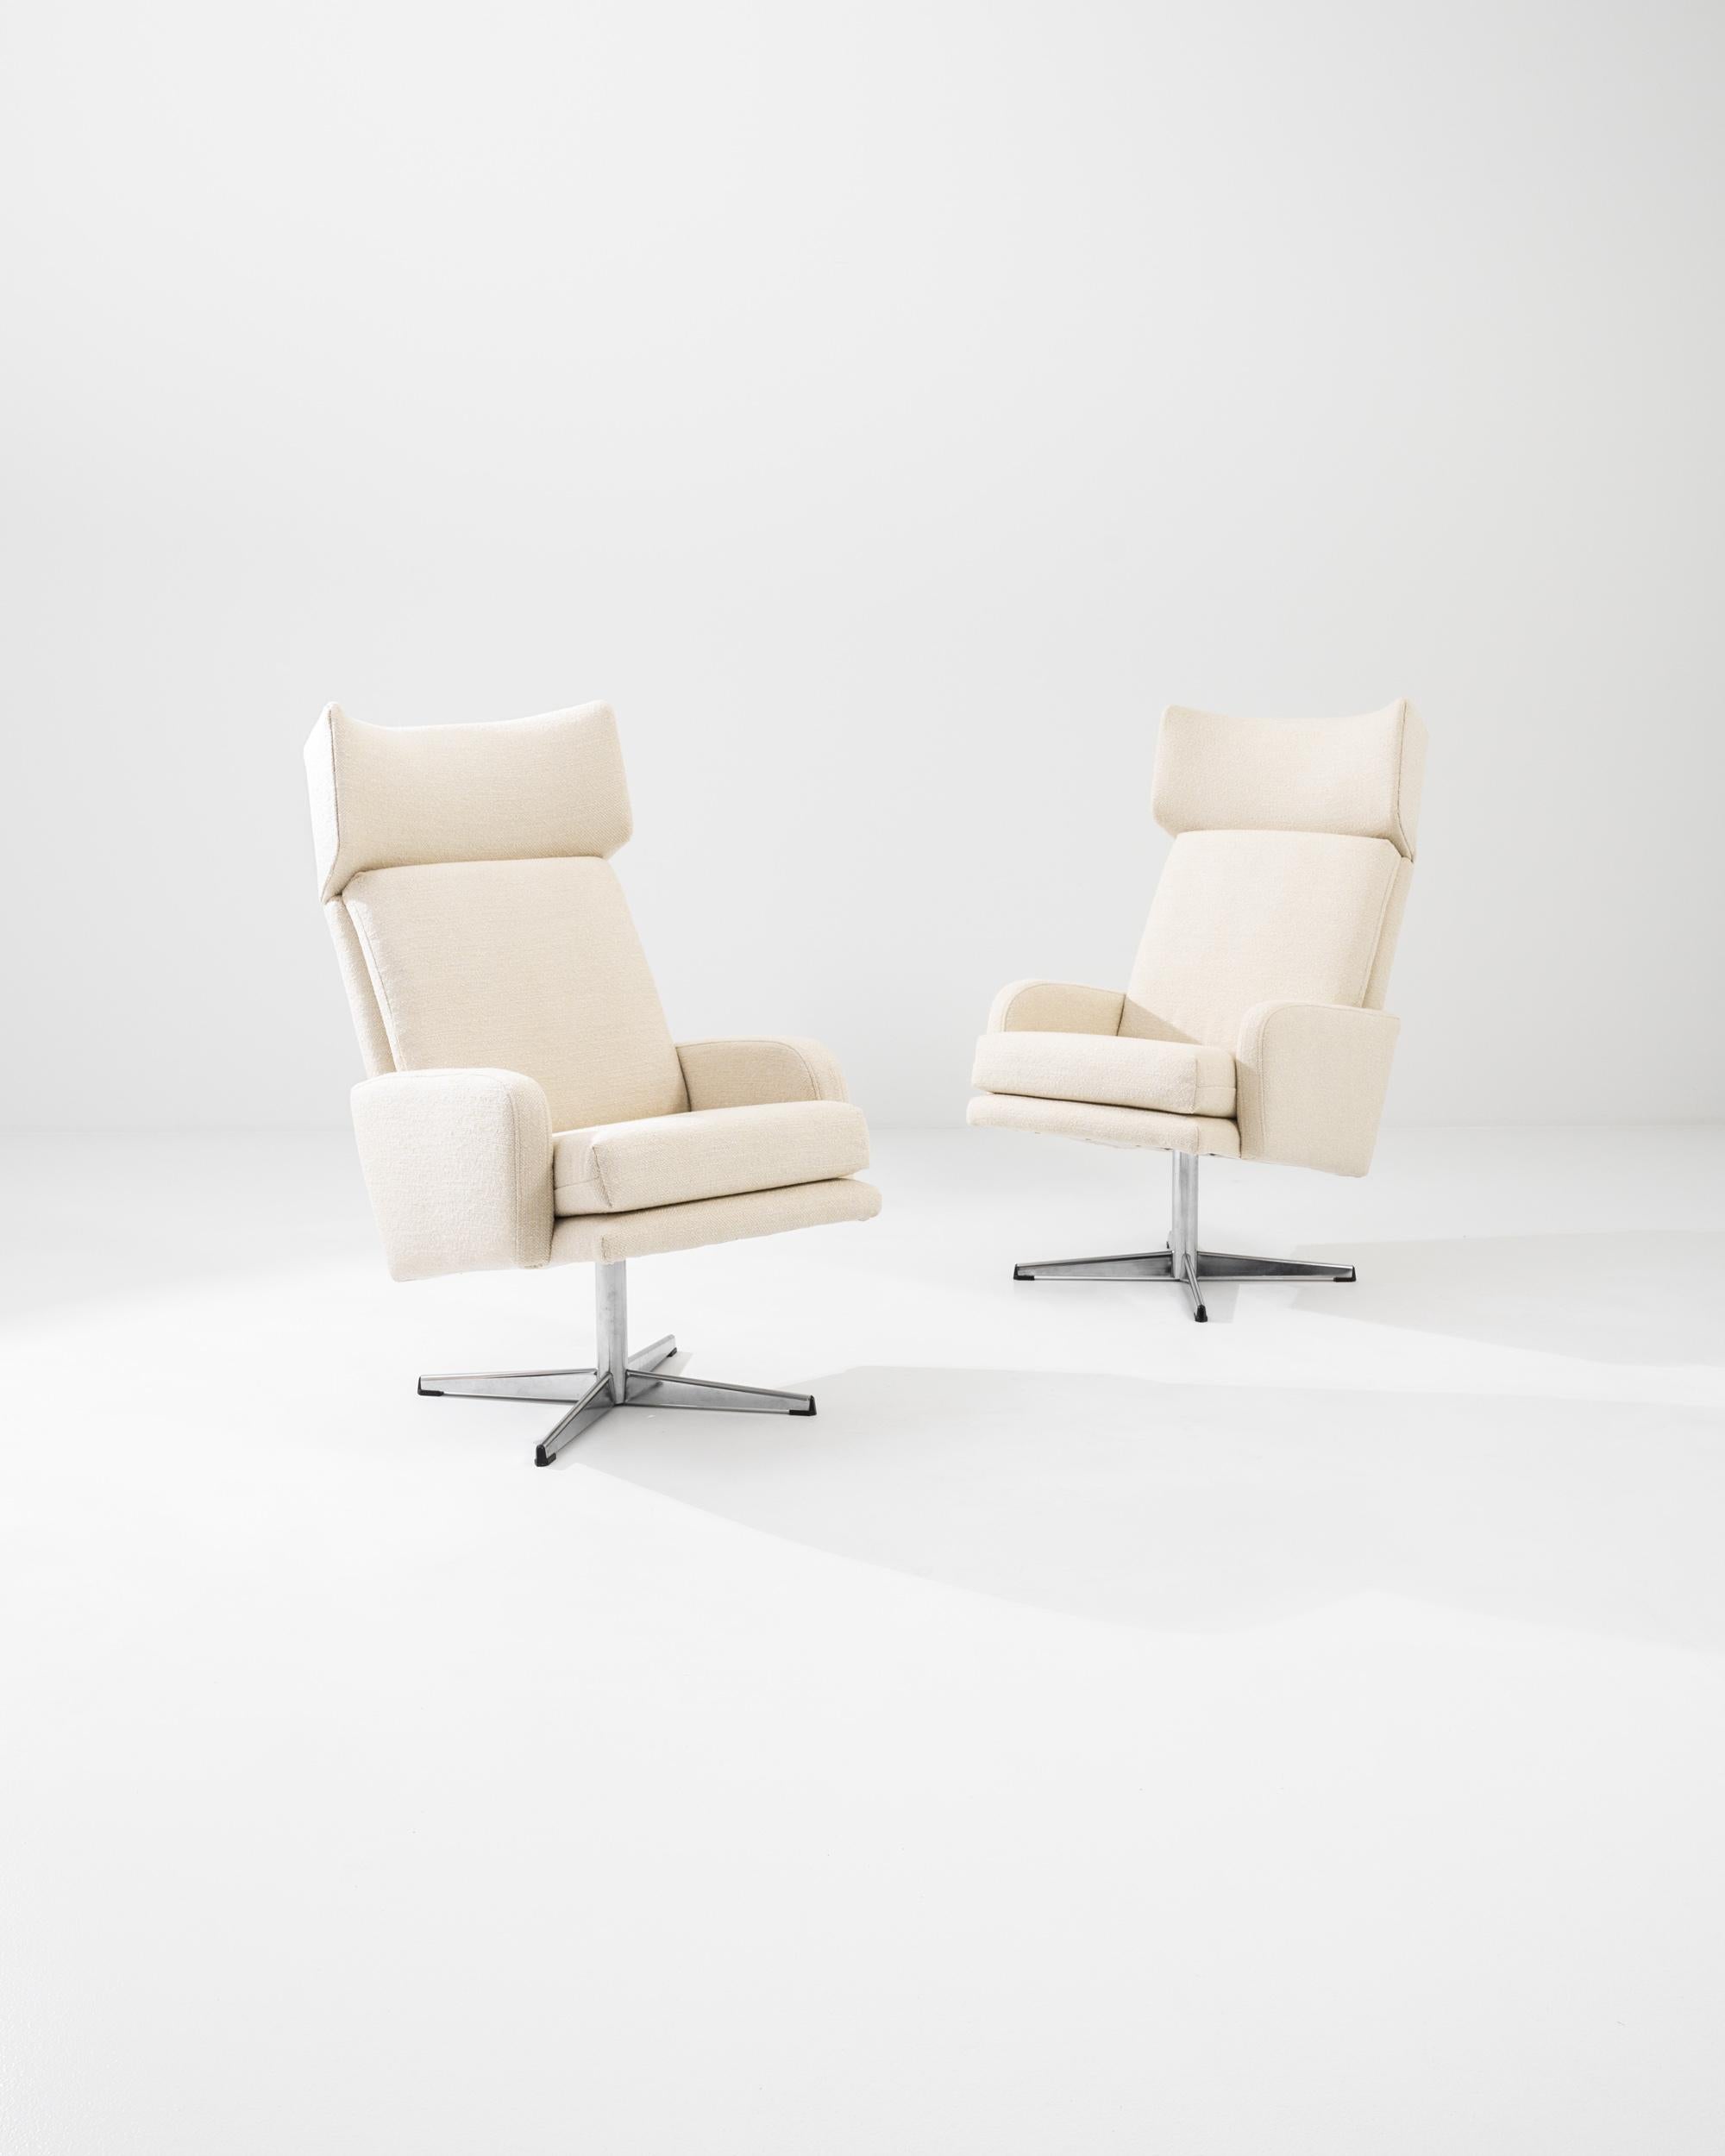 This vintage pair of rotary armchairs create an impression of luxury and productivity. The rotary chair was originally designed for industry, the swiveling movement allowed workers to reach things more easily at their desks, and this design from